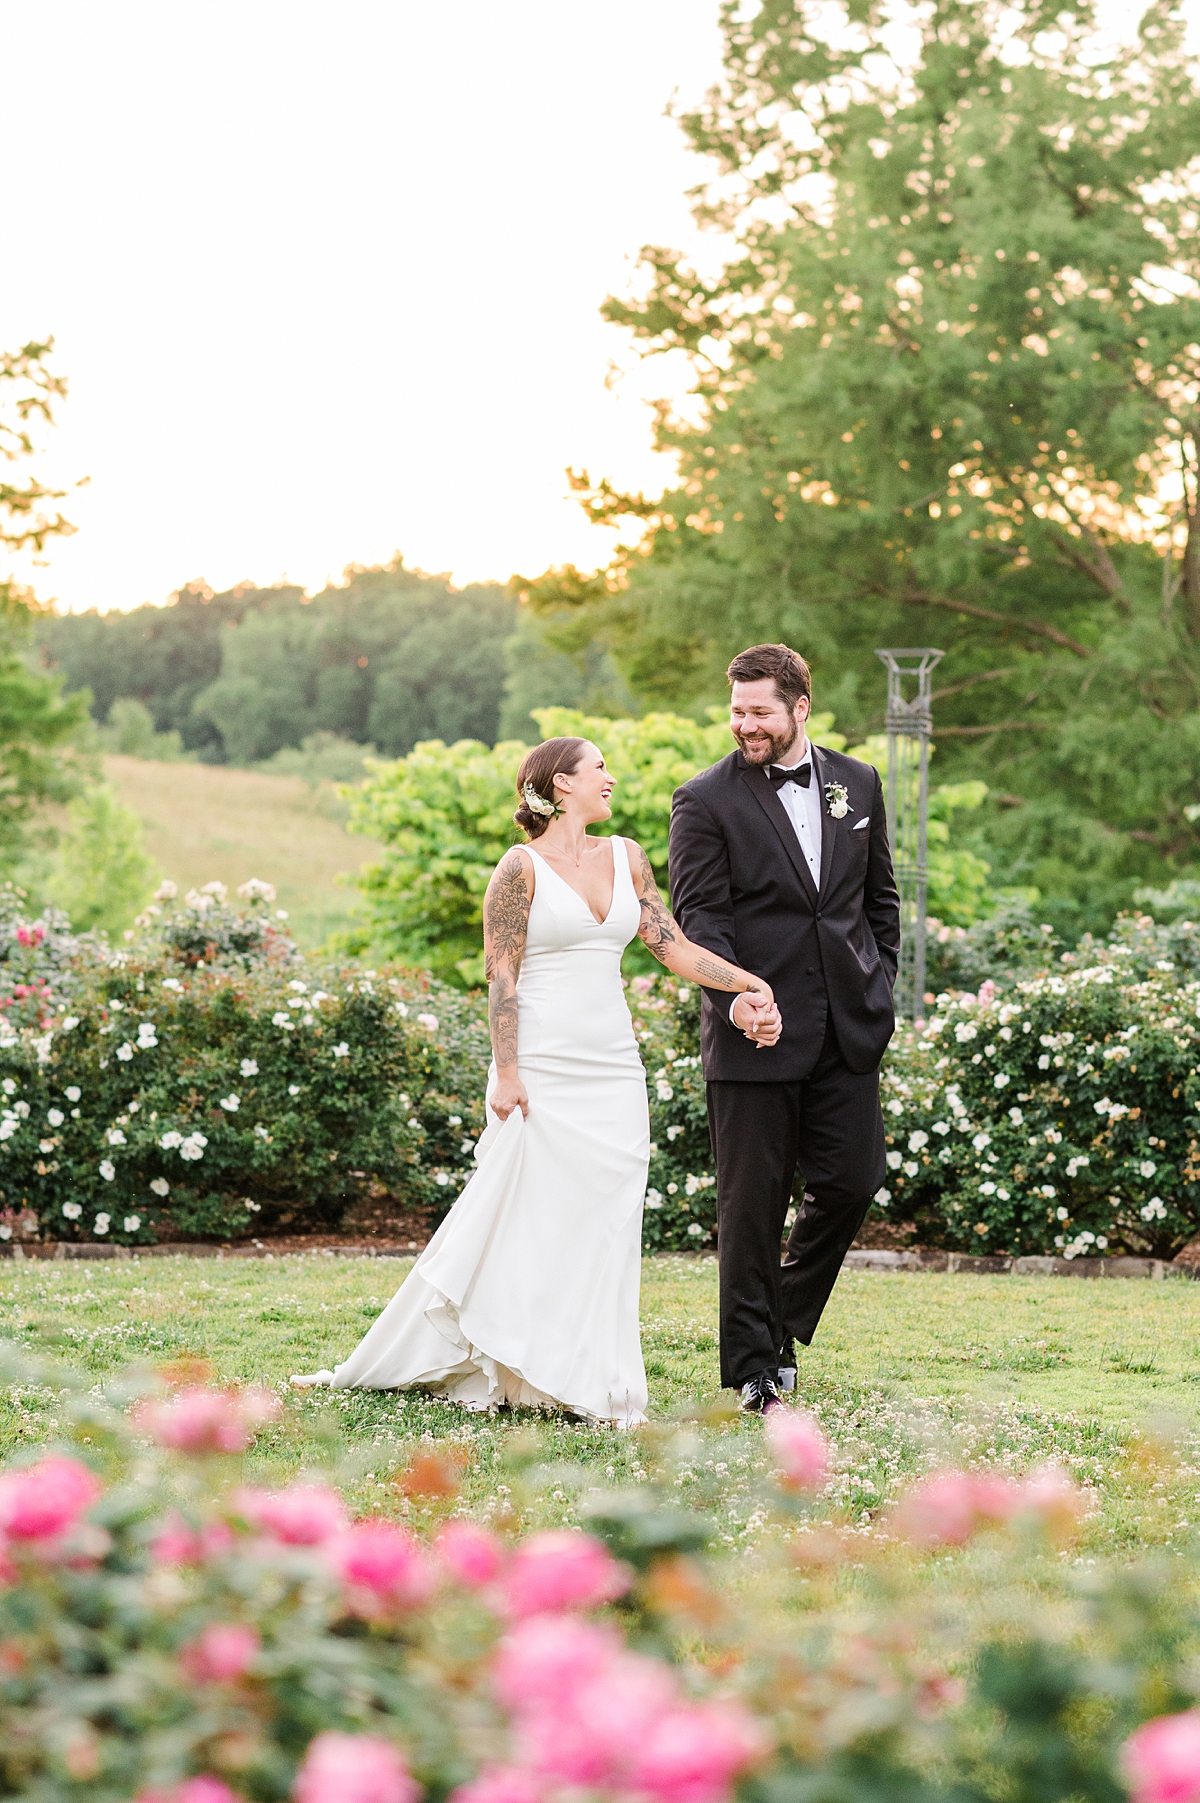 Bride and Groom Portraits at Spring Lewis Ginter Botanical Garden Wedding. Richmond Wedding Photographer Kailey Brianne Photography. 